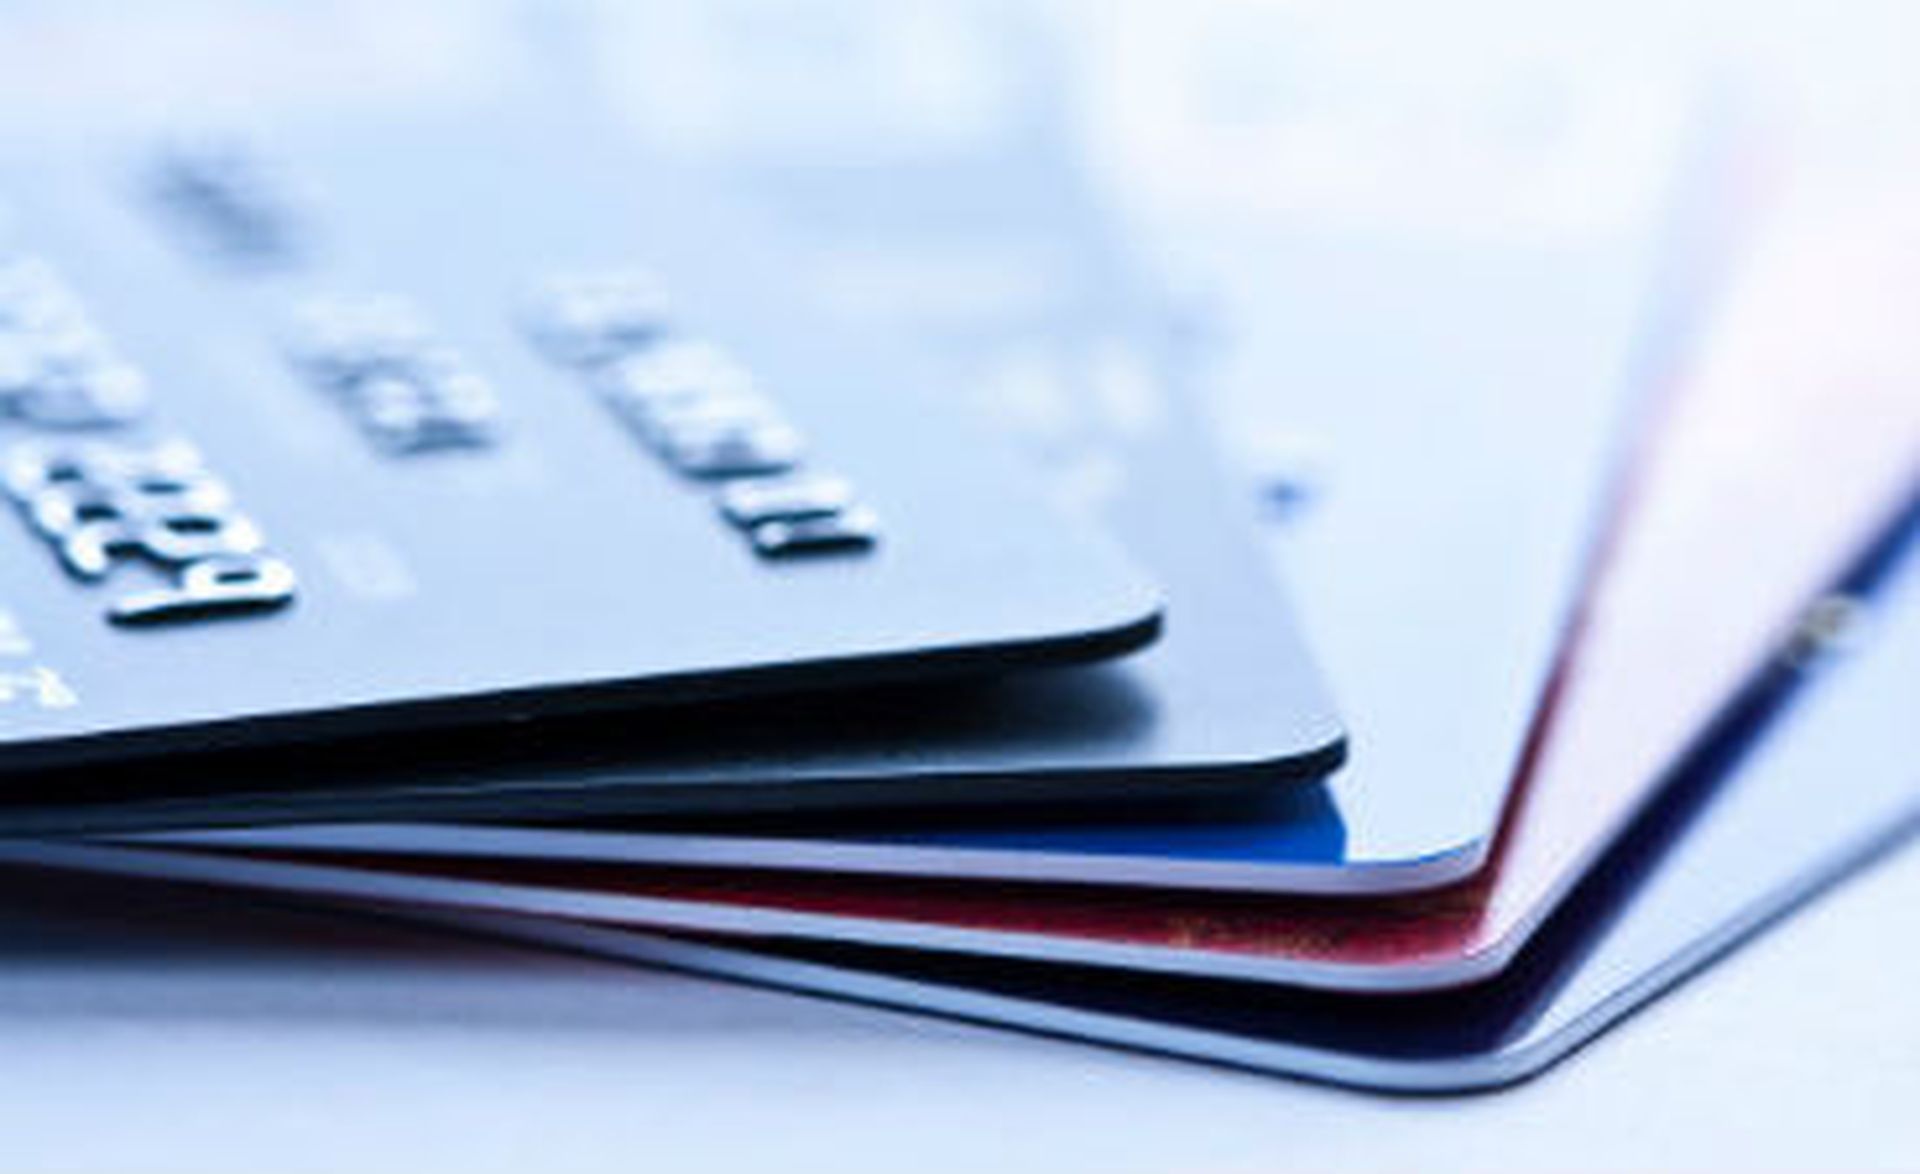 Layering EMV chip, tokenization, encryption bolsters card payment security